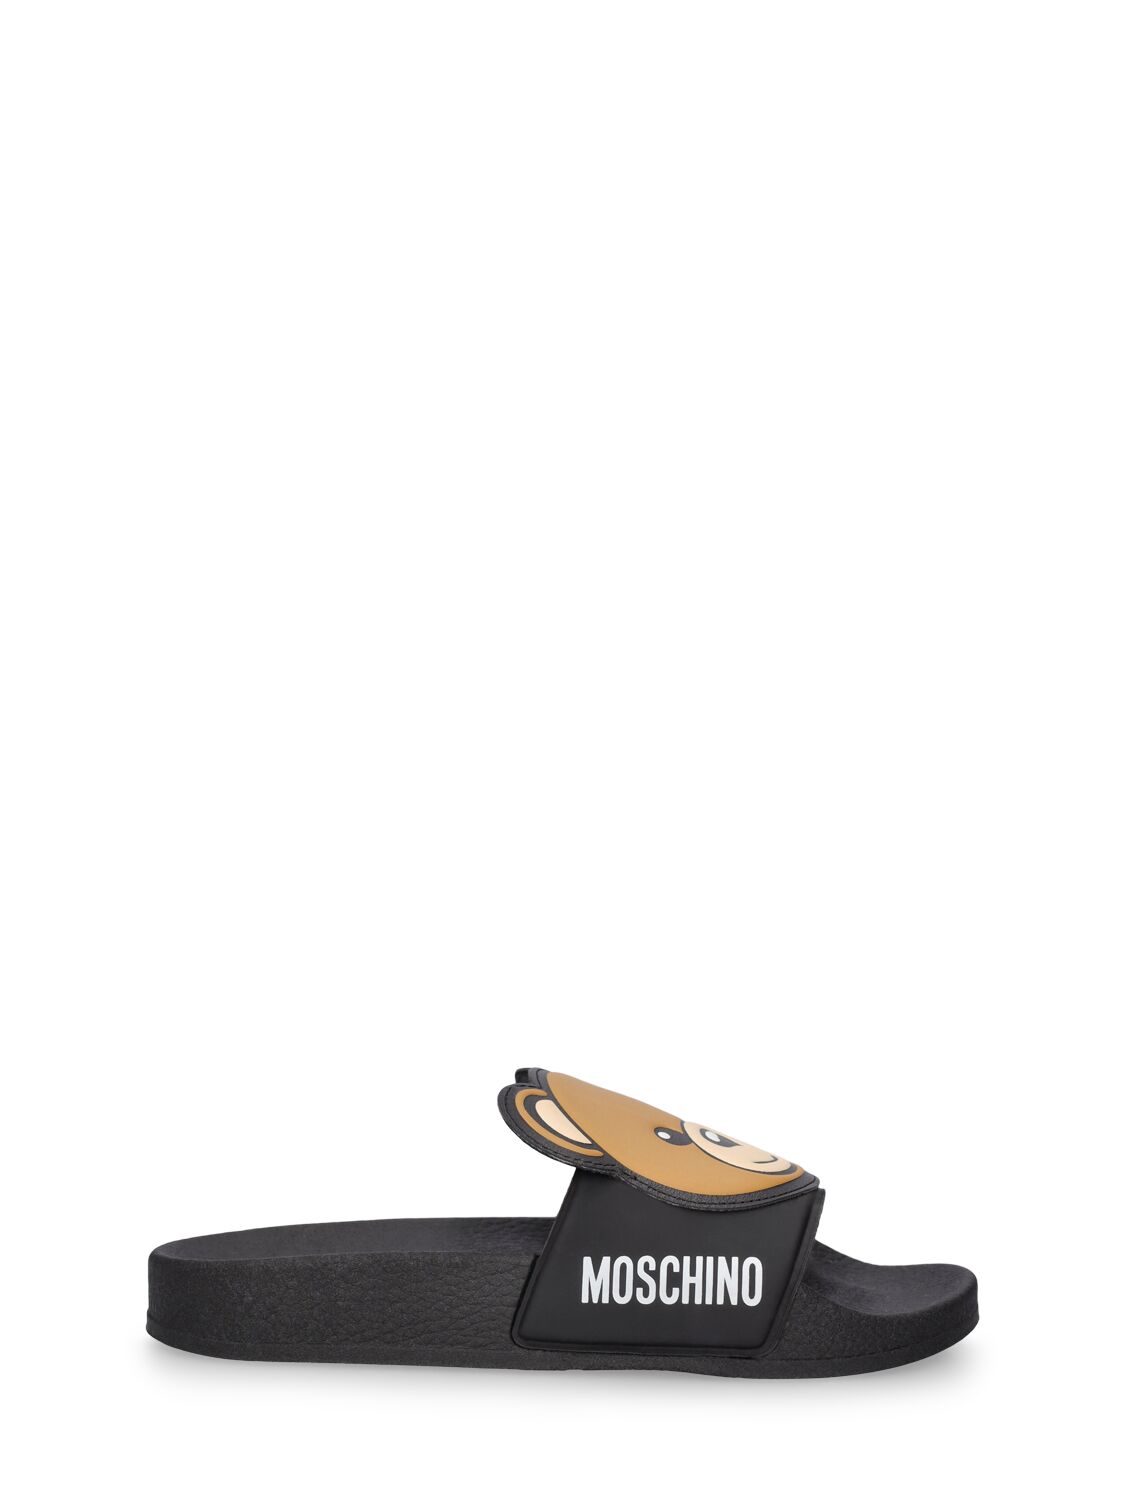 Moschino Kids' Logo Print Rubber Slide Sandals W/ Patch In Black